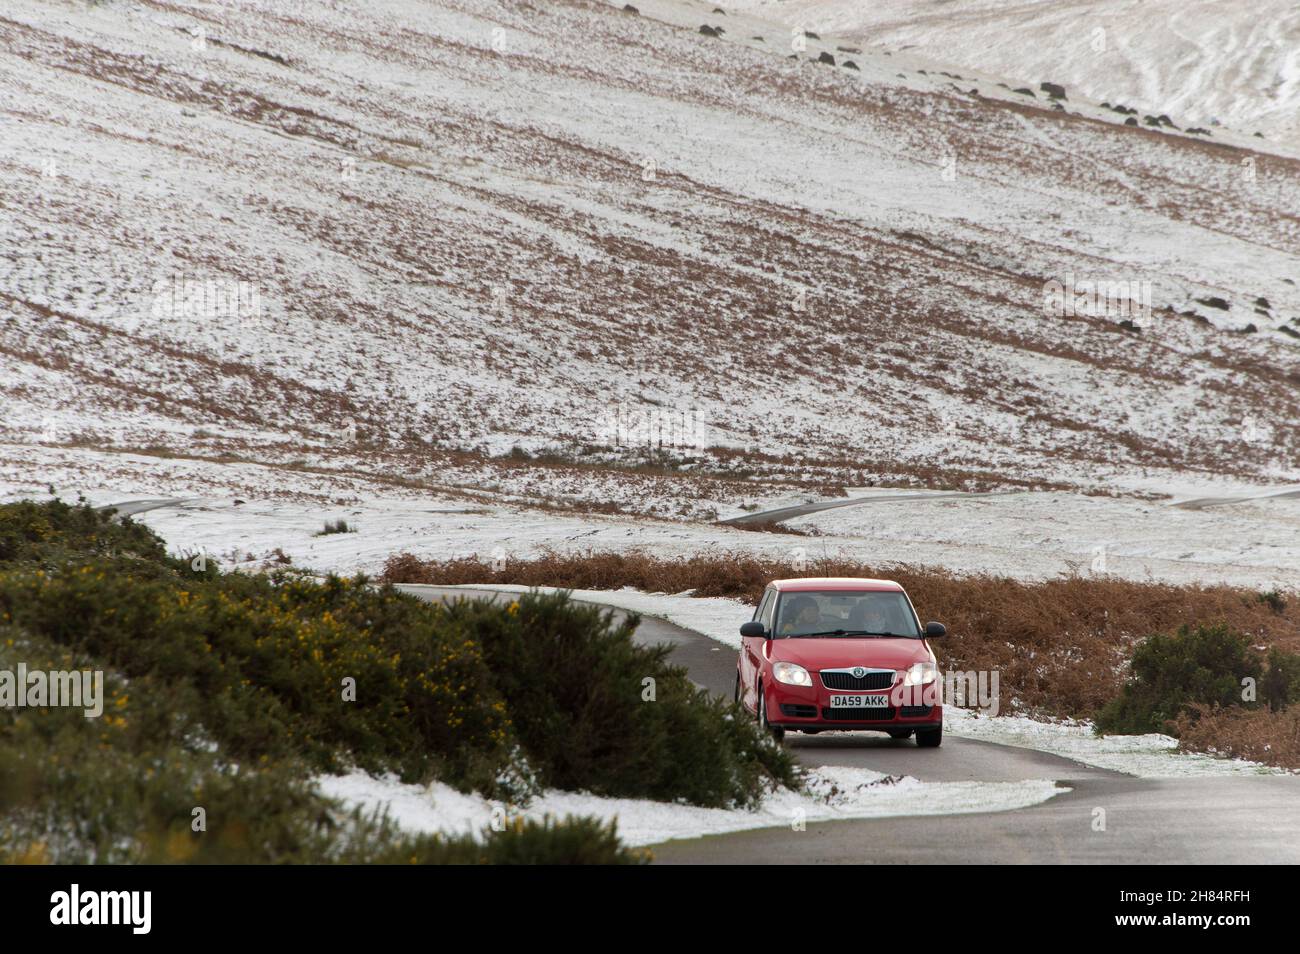 Brecon Beacons, Powys, Wales, UK. 27th Nov, 2021. A motorist drives through a wintry landscape after snow fell overnight on high land in the Brecon Beacons National Park in Powys, Wales, UK Credit: Graham M. Lawrence/Alamy Live News Stock Photo